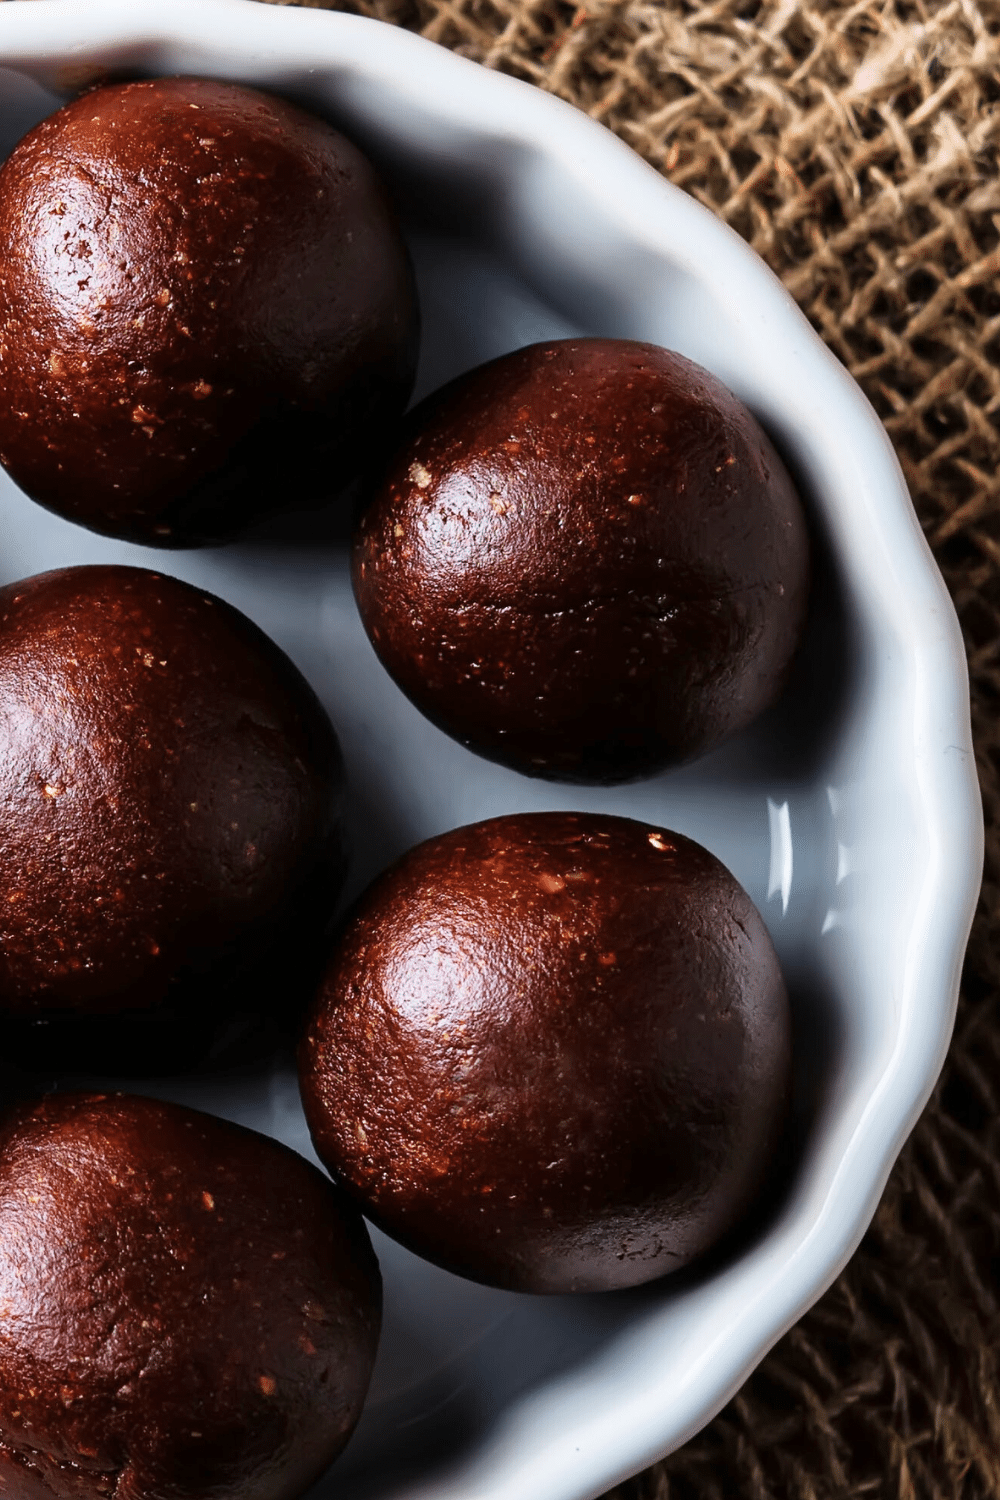 A delightful assortment of keto brownie fat bombs, artfully arranged in a group, showcasing their decadent appearance.